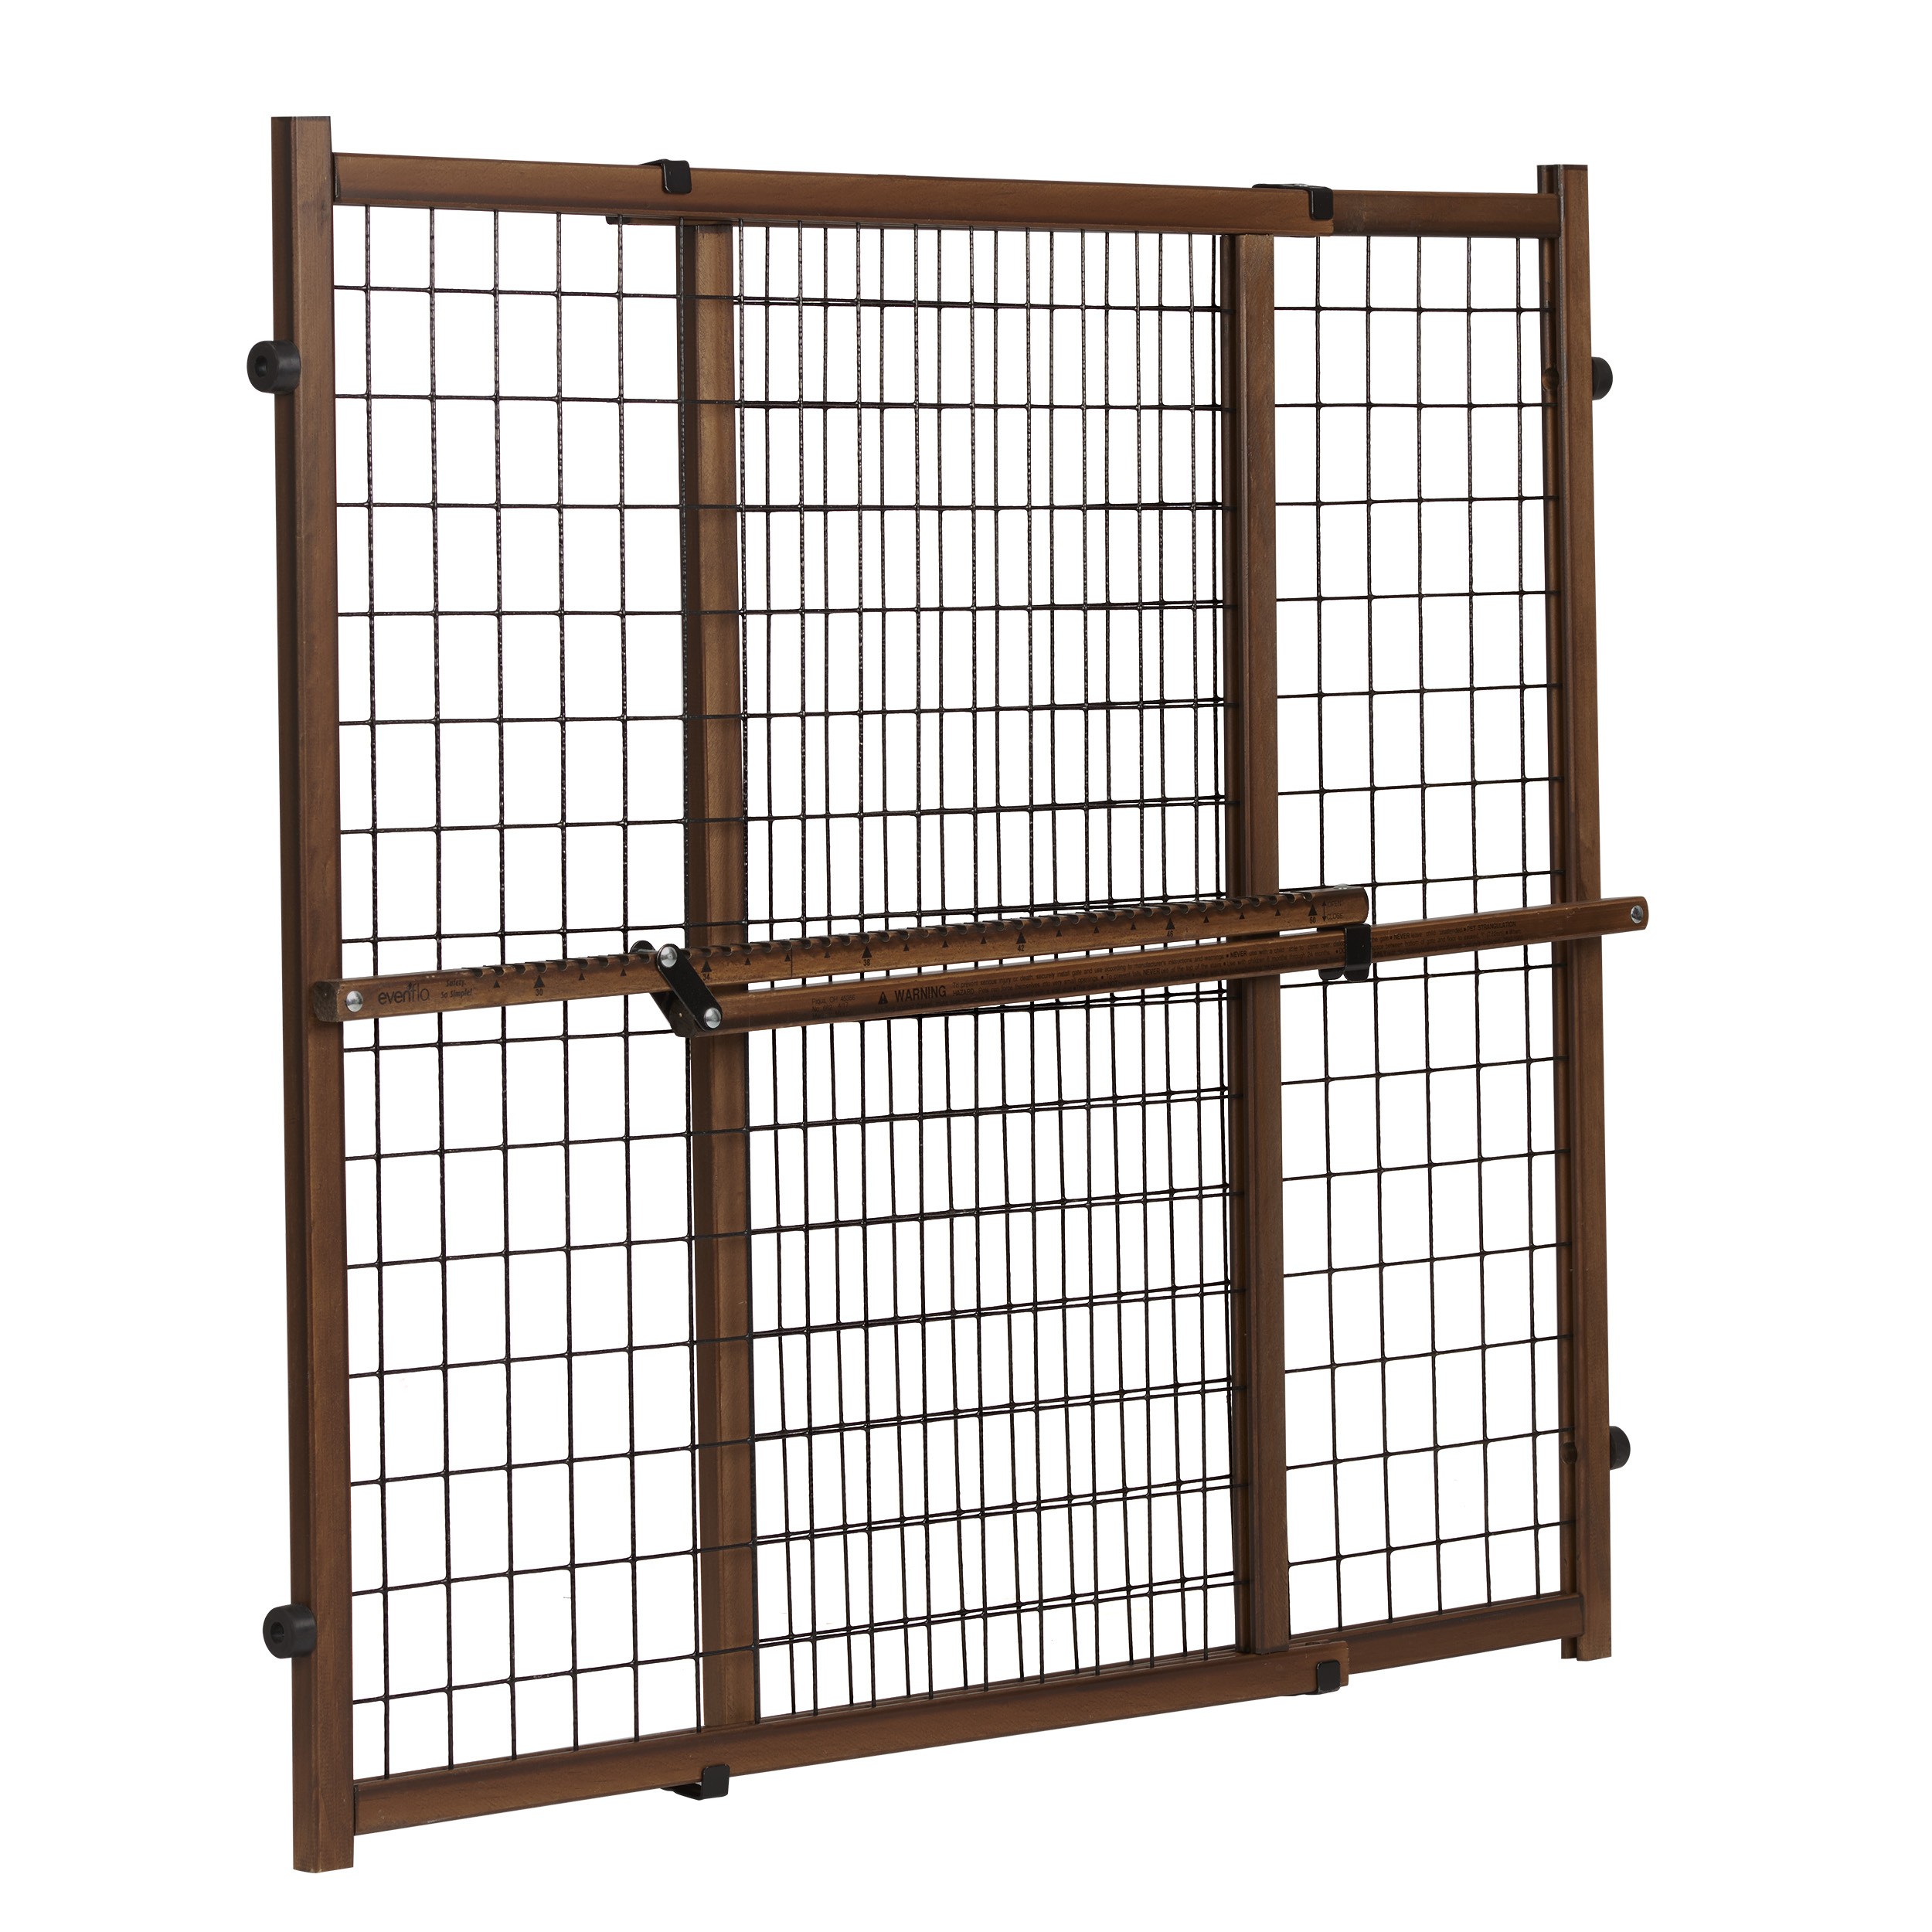 Evenflo Position and Lock Tall Pressure Mount Wood Gate